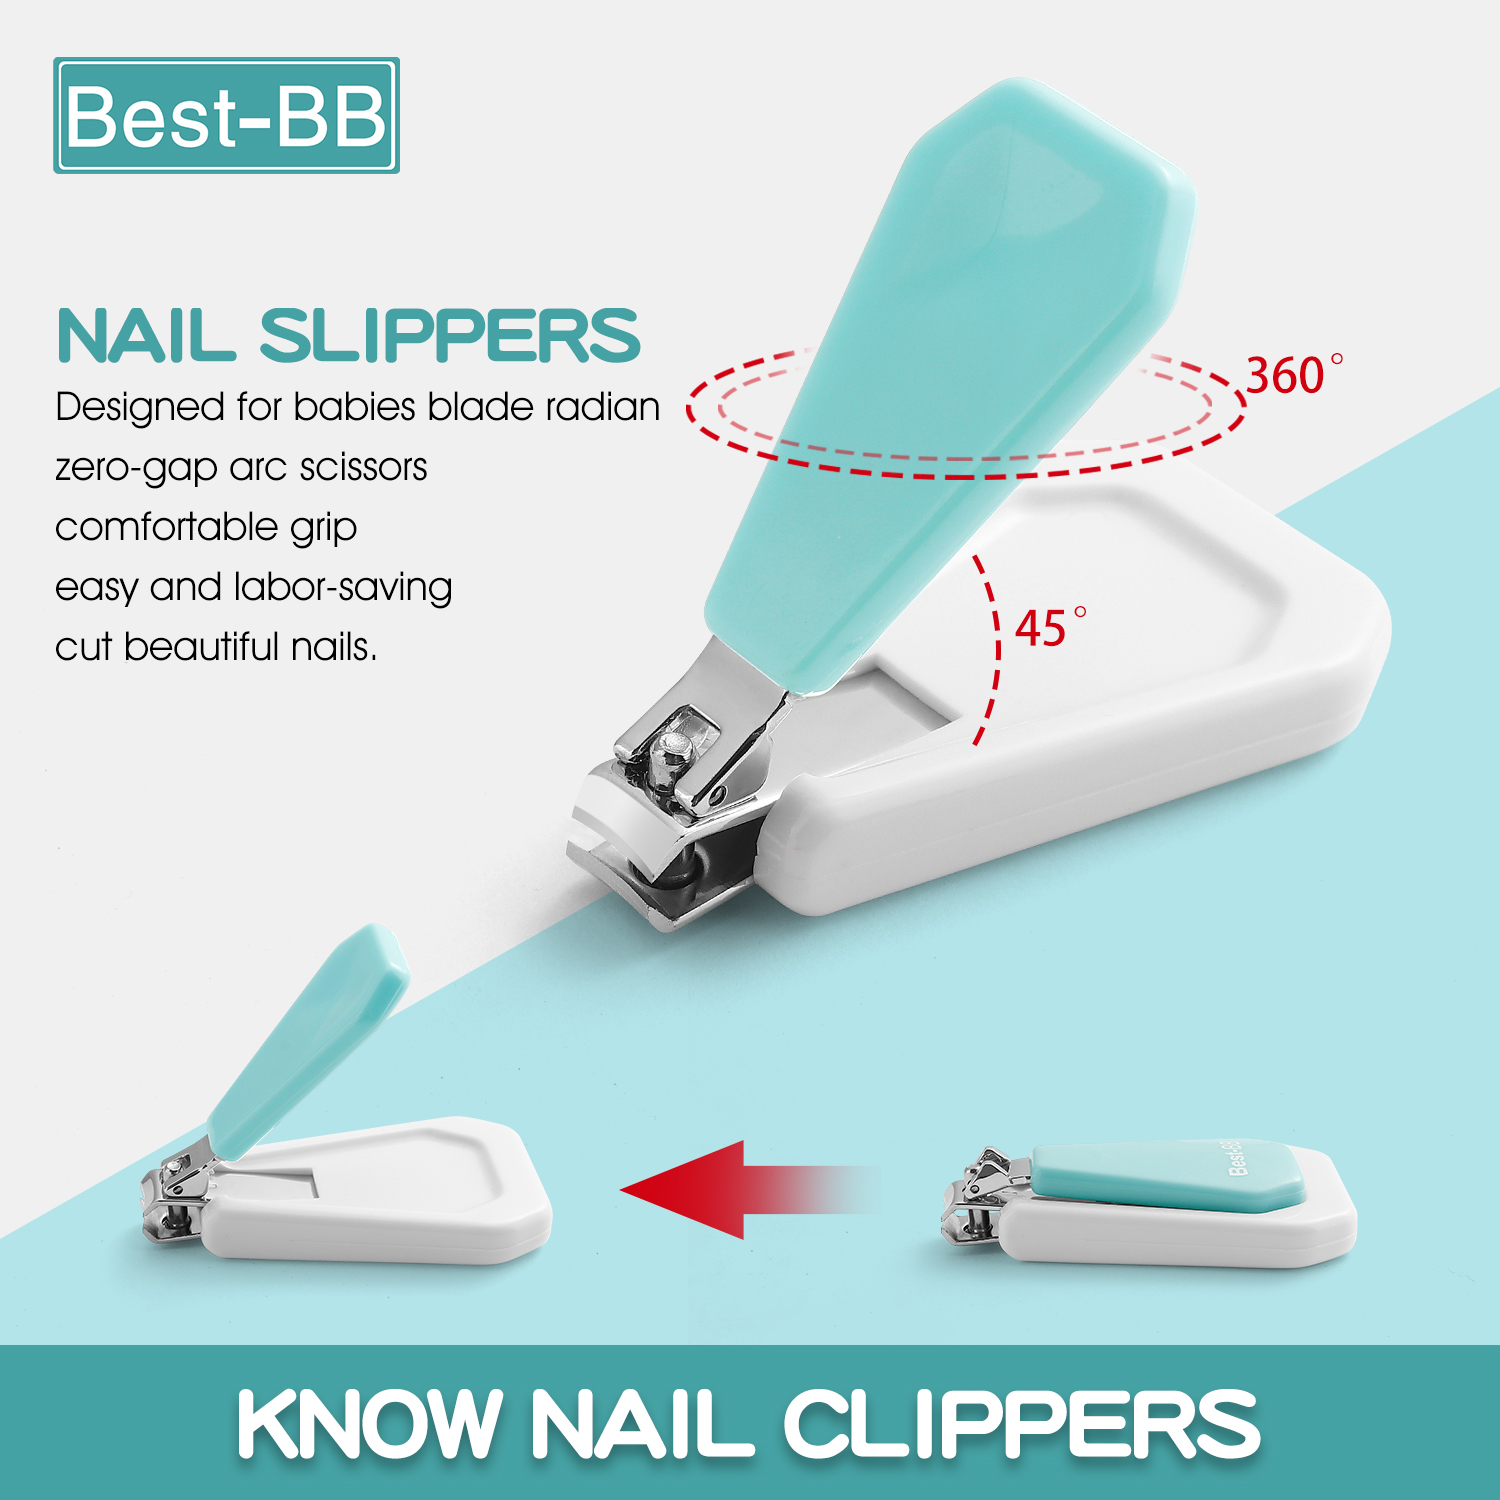 4-nail clippers